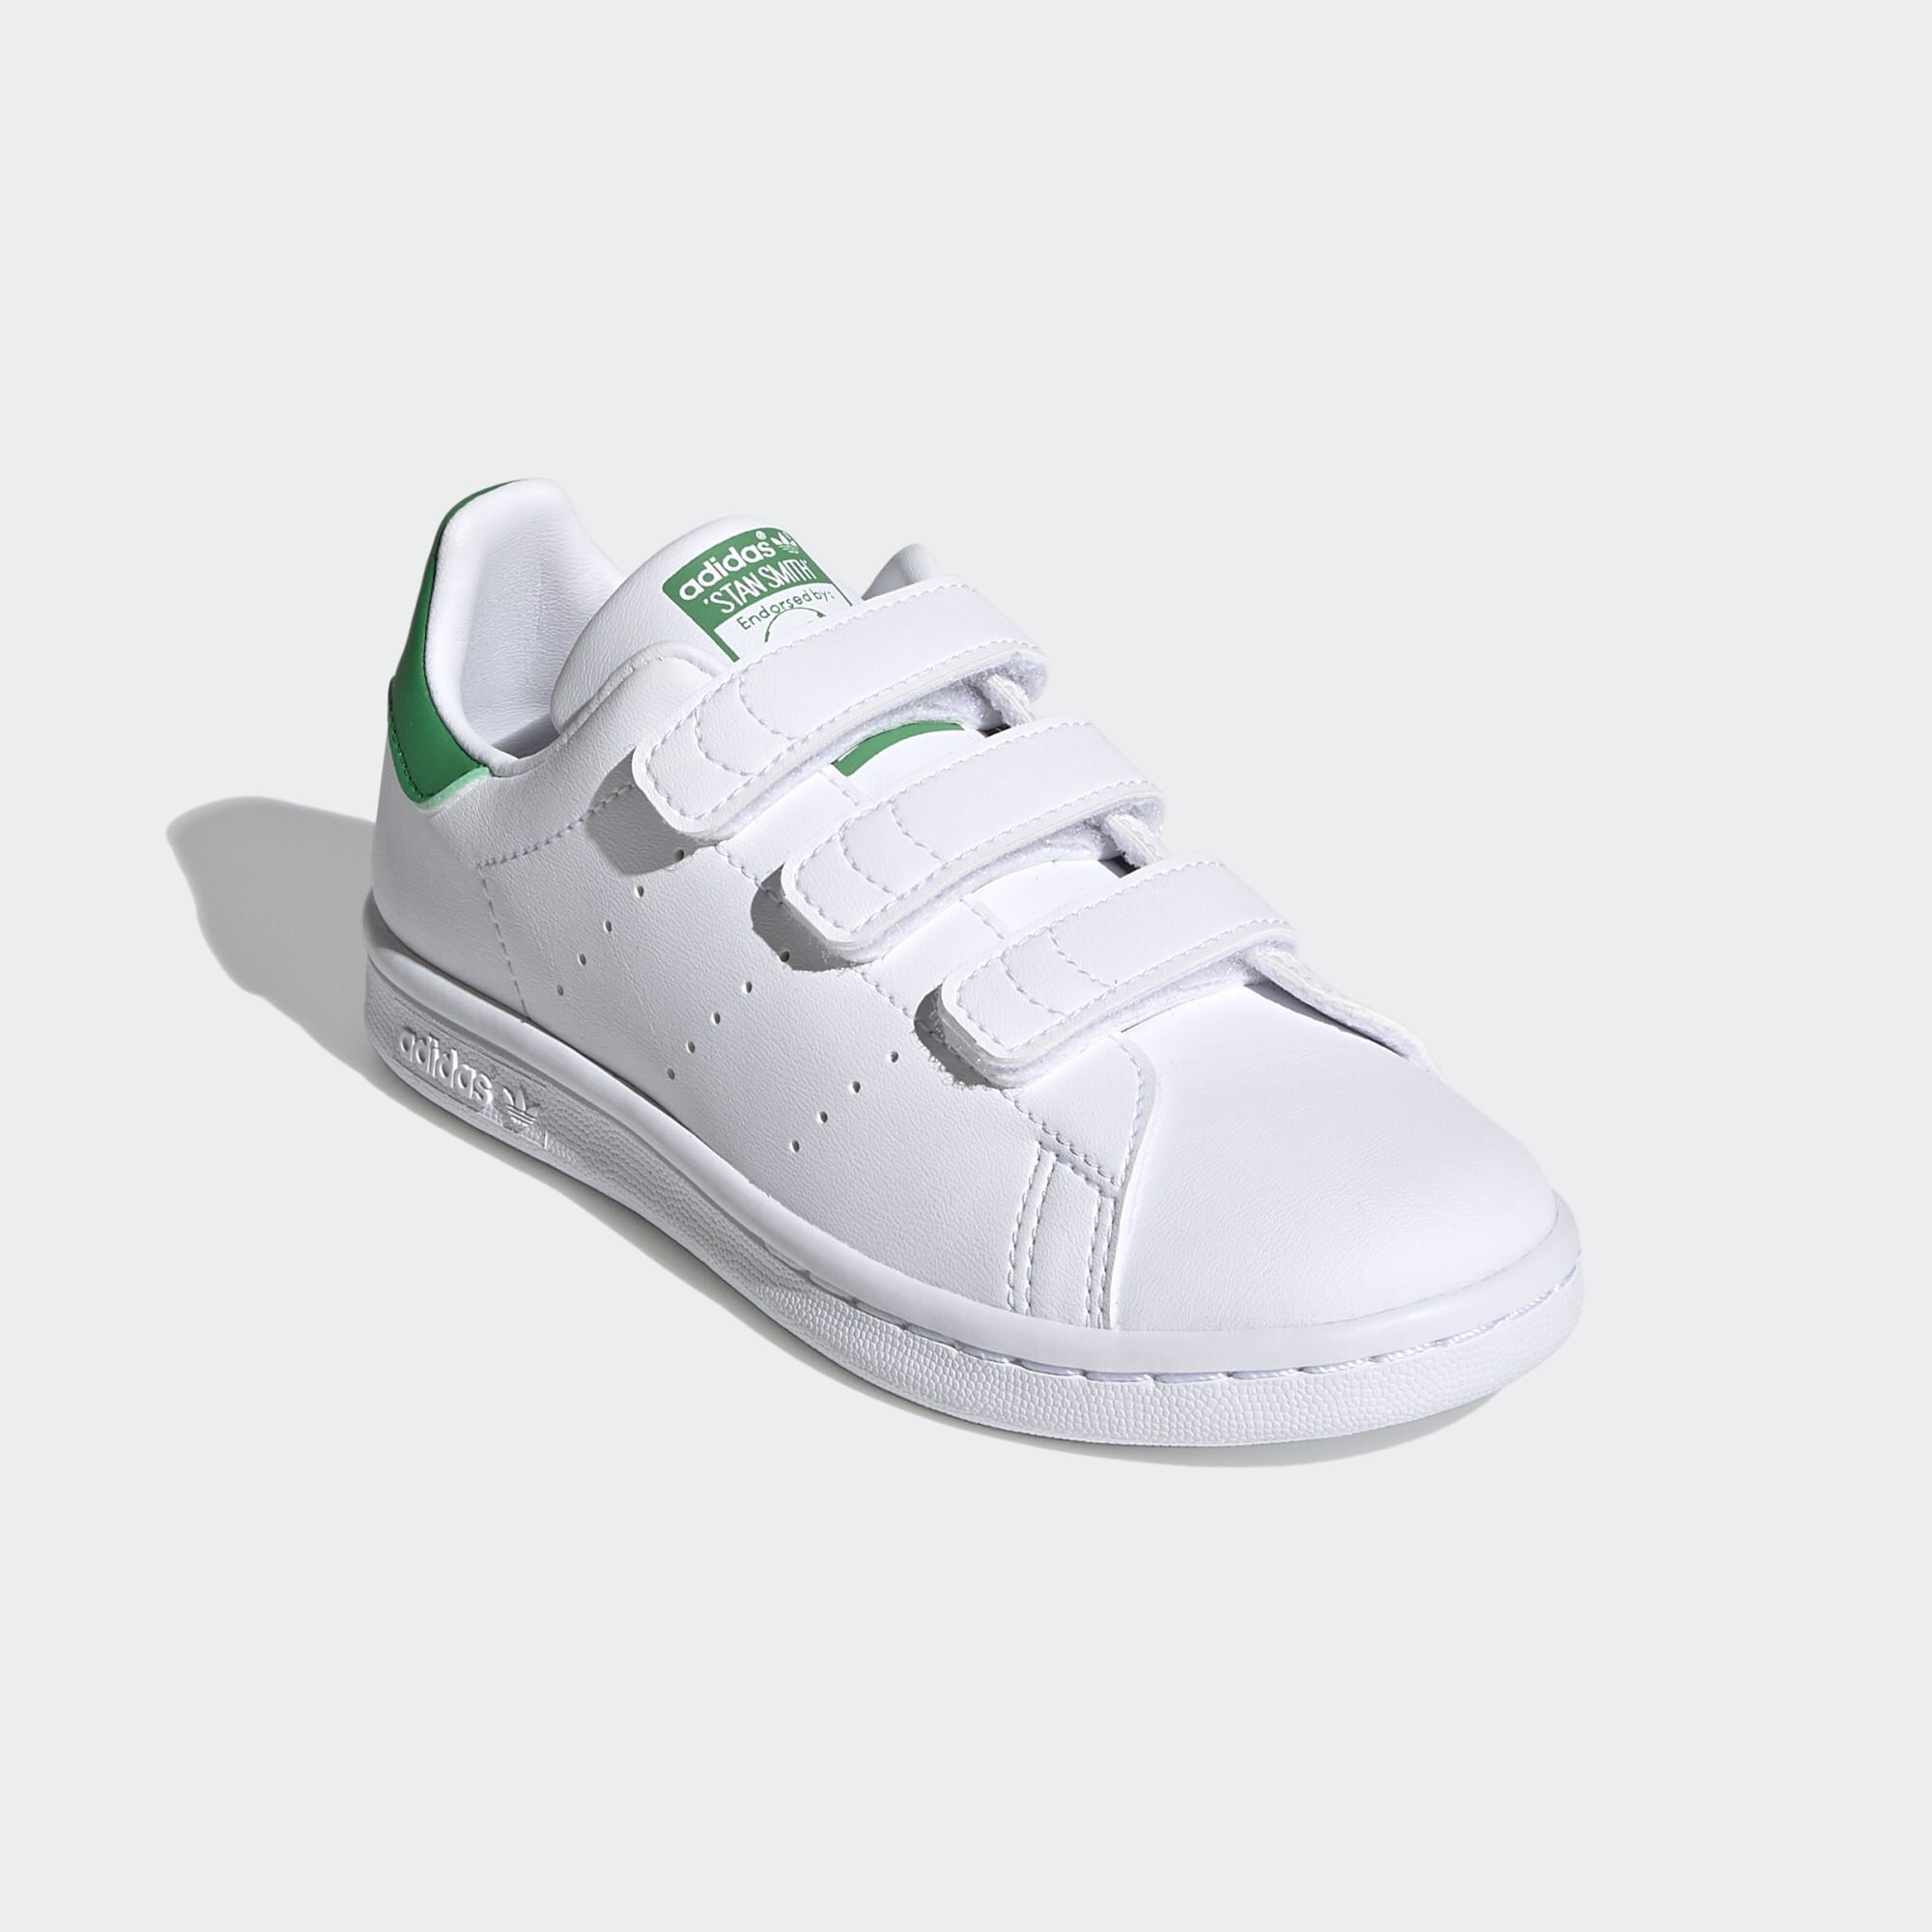 Adidas Stan Smith Kids - Girls Shoes - Casual - Velcro Adidas 2021